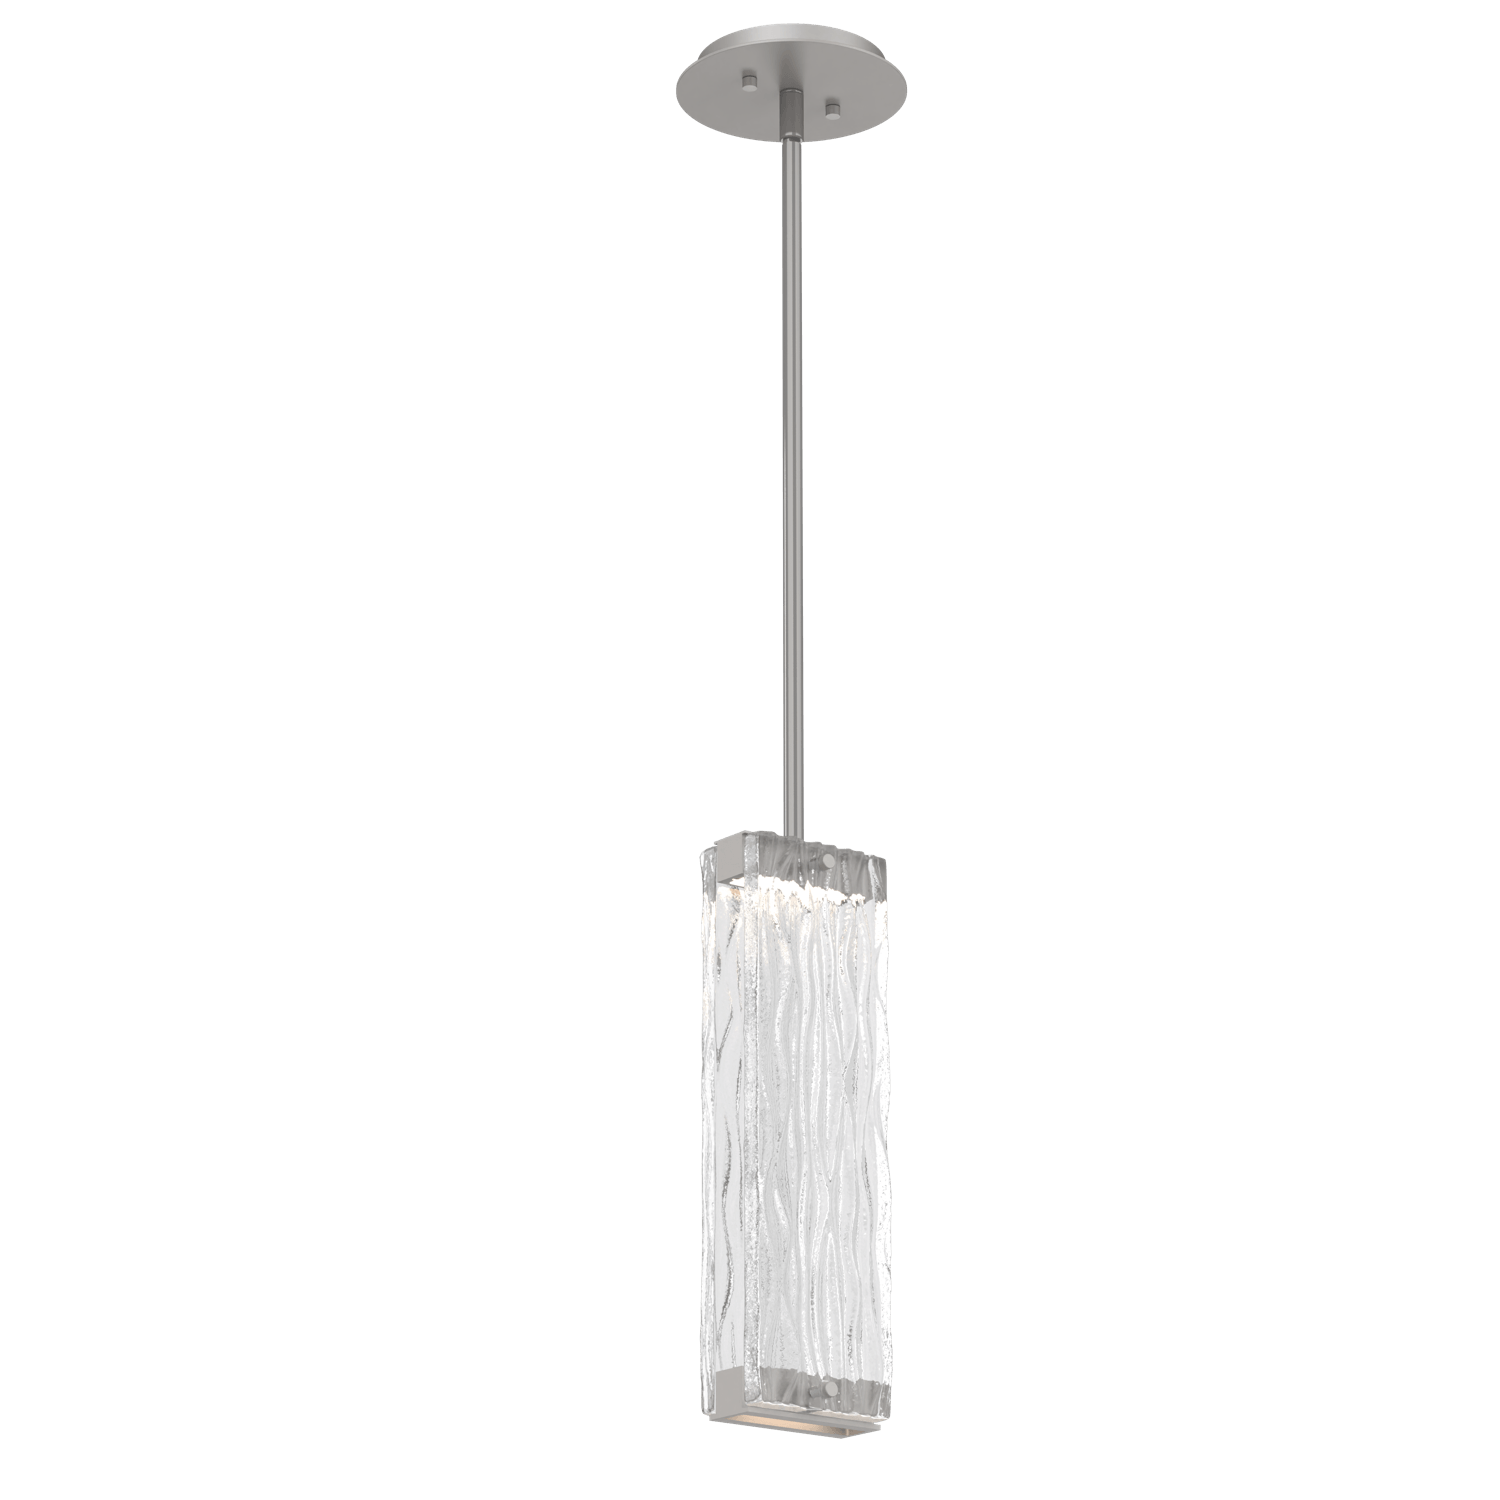 LAB0090-01-BS-TT-Hammerton-Studio-Tabulo-pendant-light-with-metallic-beige-silver-finish-and-clear-tidal-cast-glass-shade-and-LED-lamping